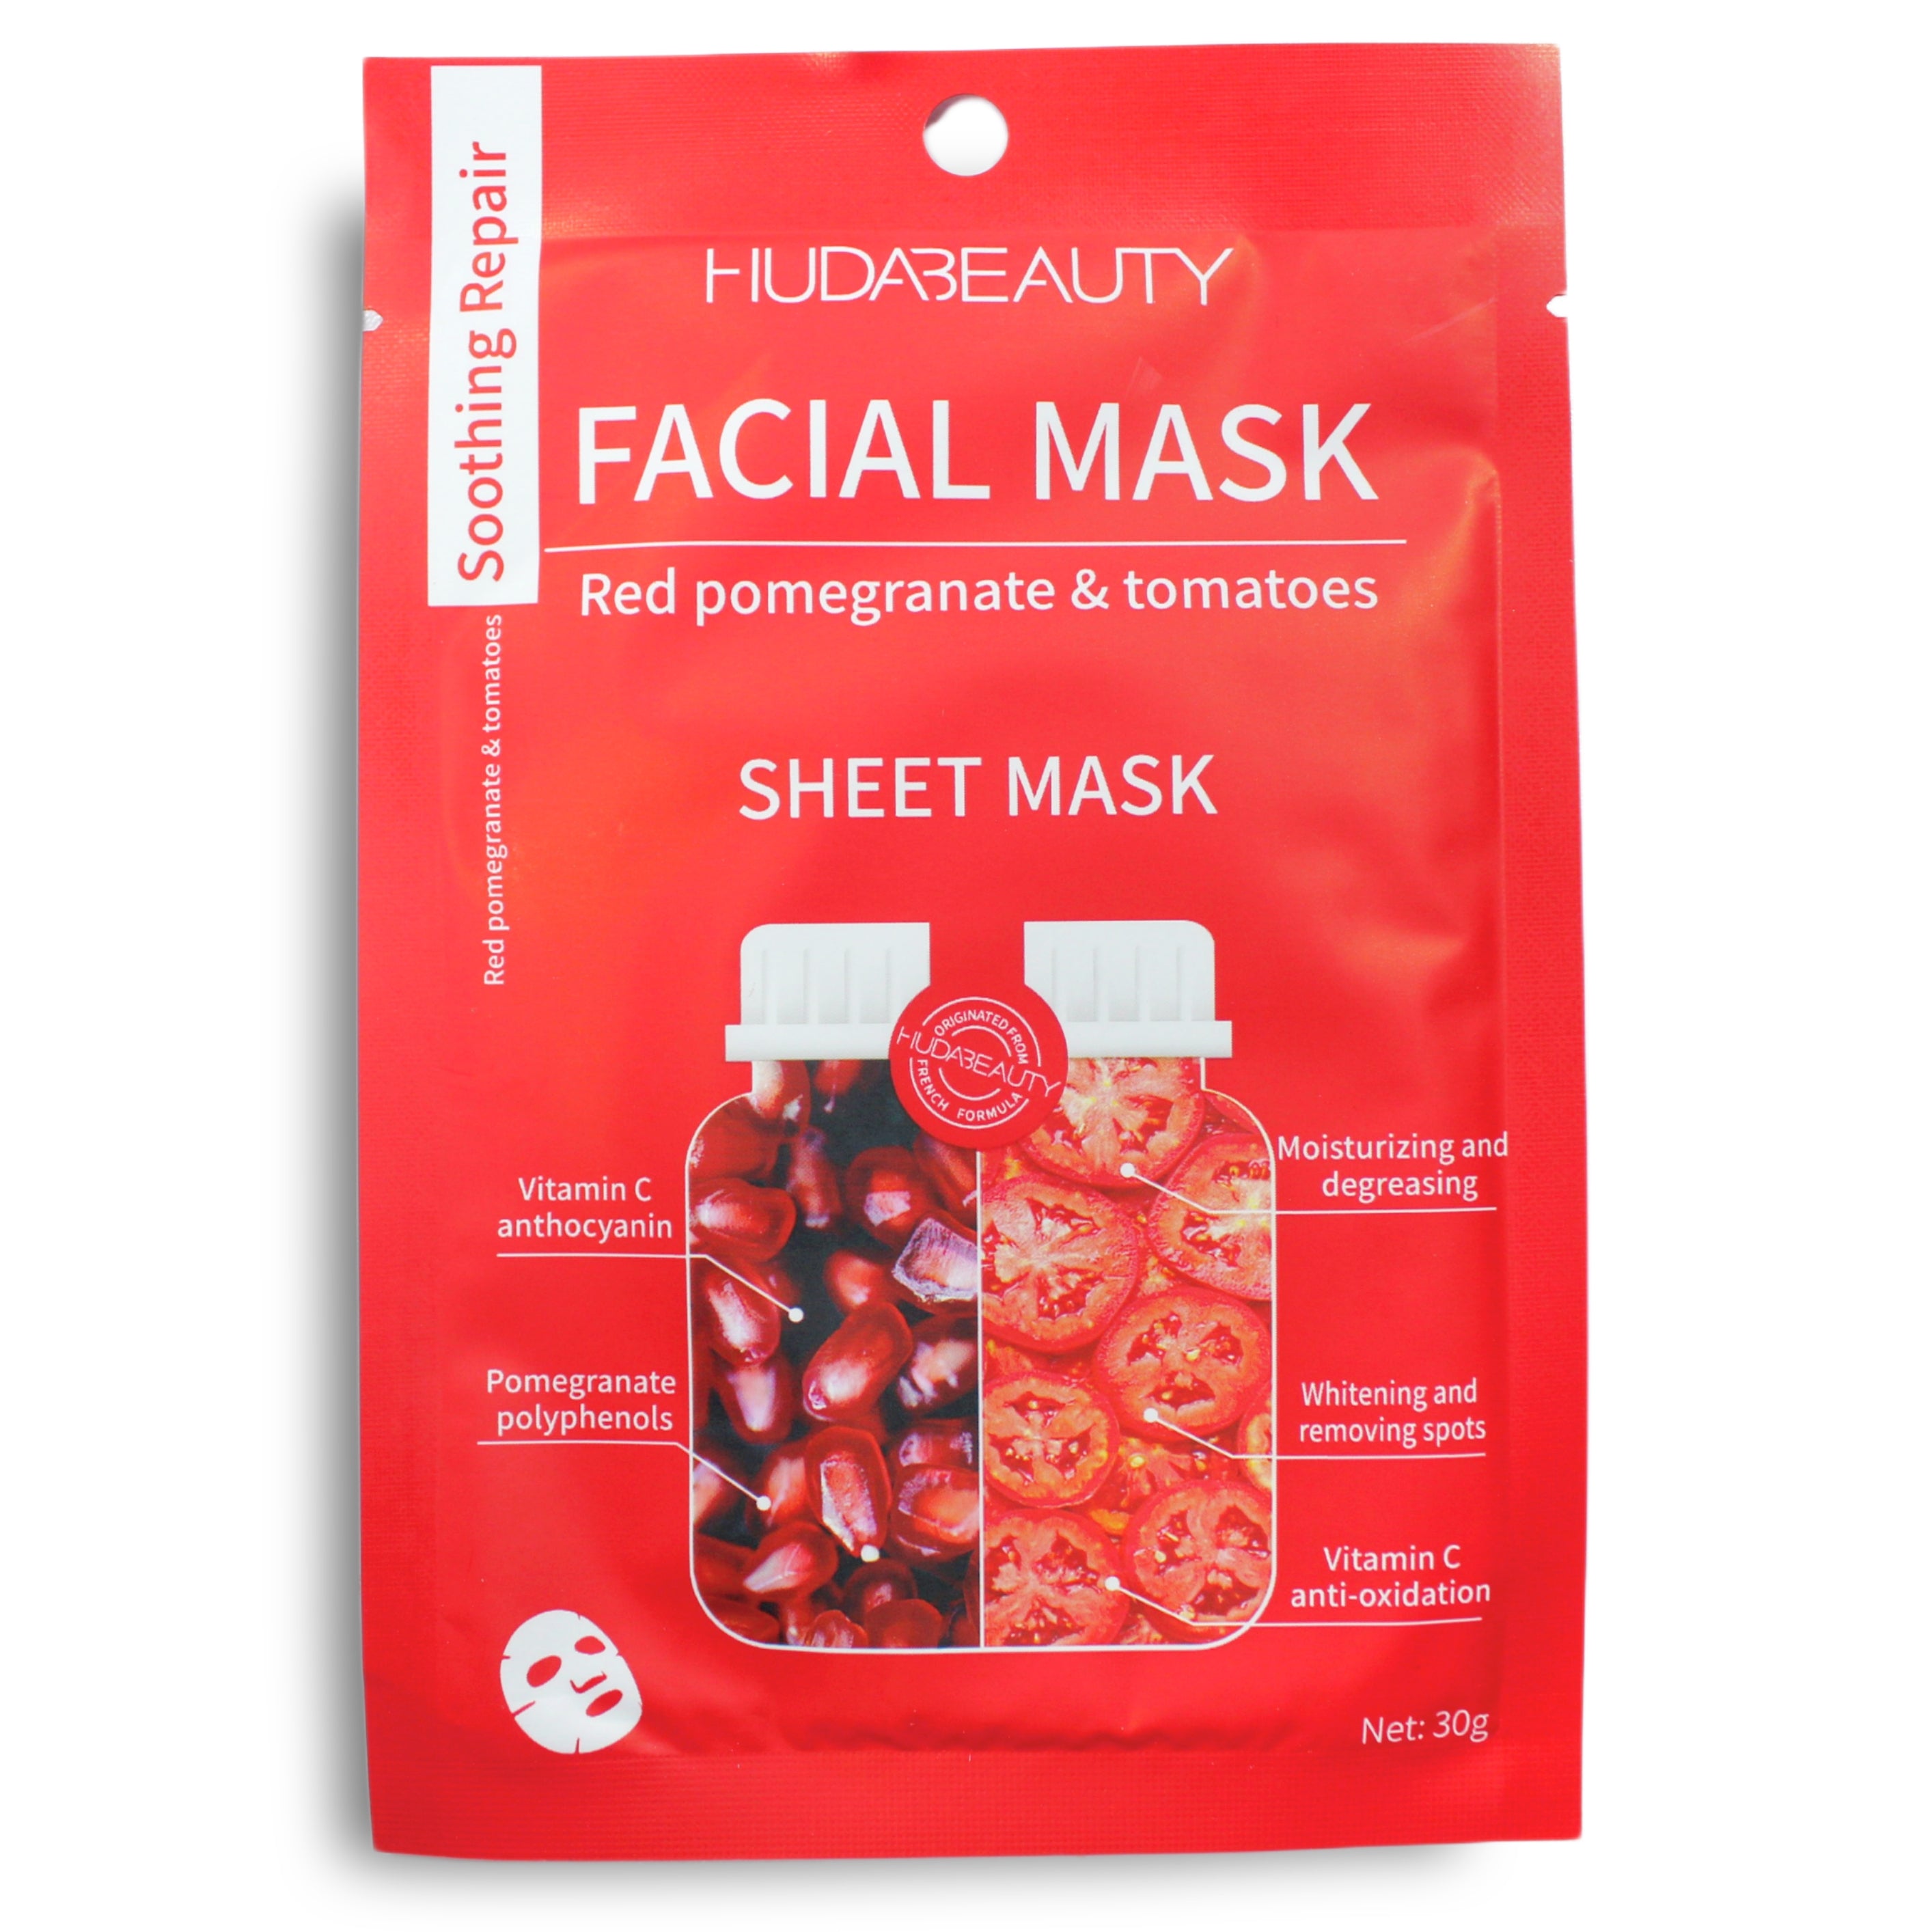 SHEET MASK RED POMEGRANTE & TOMATOES 10 PCS PACK